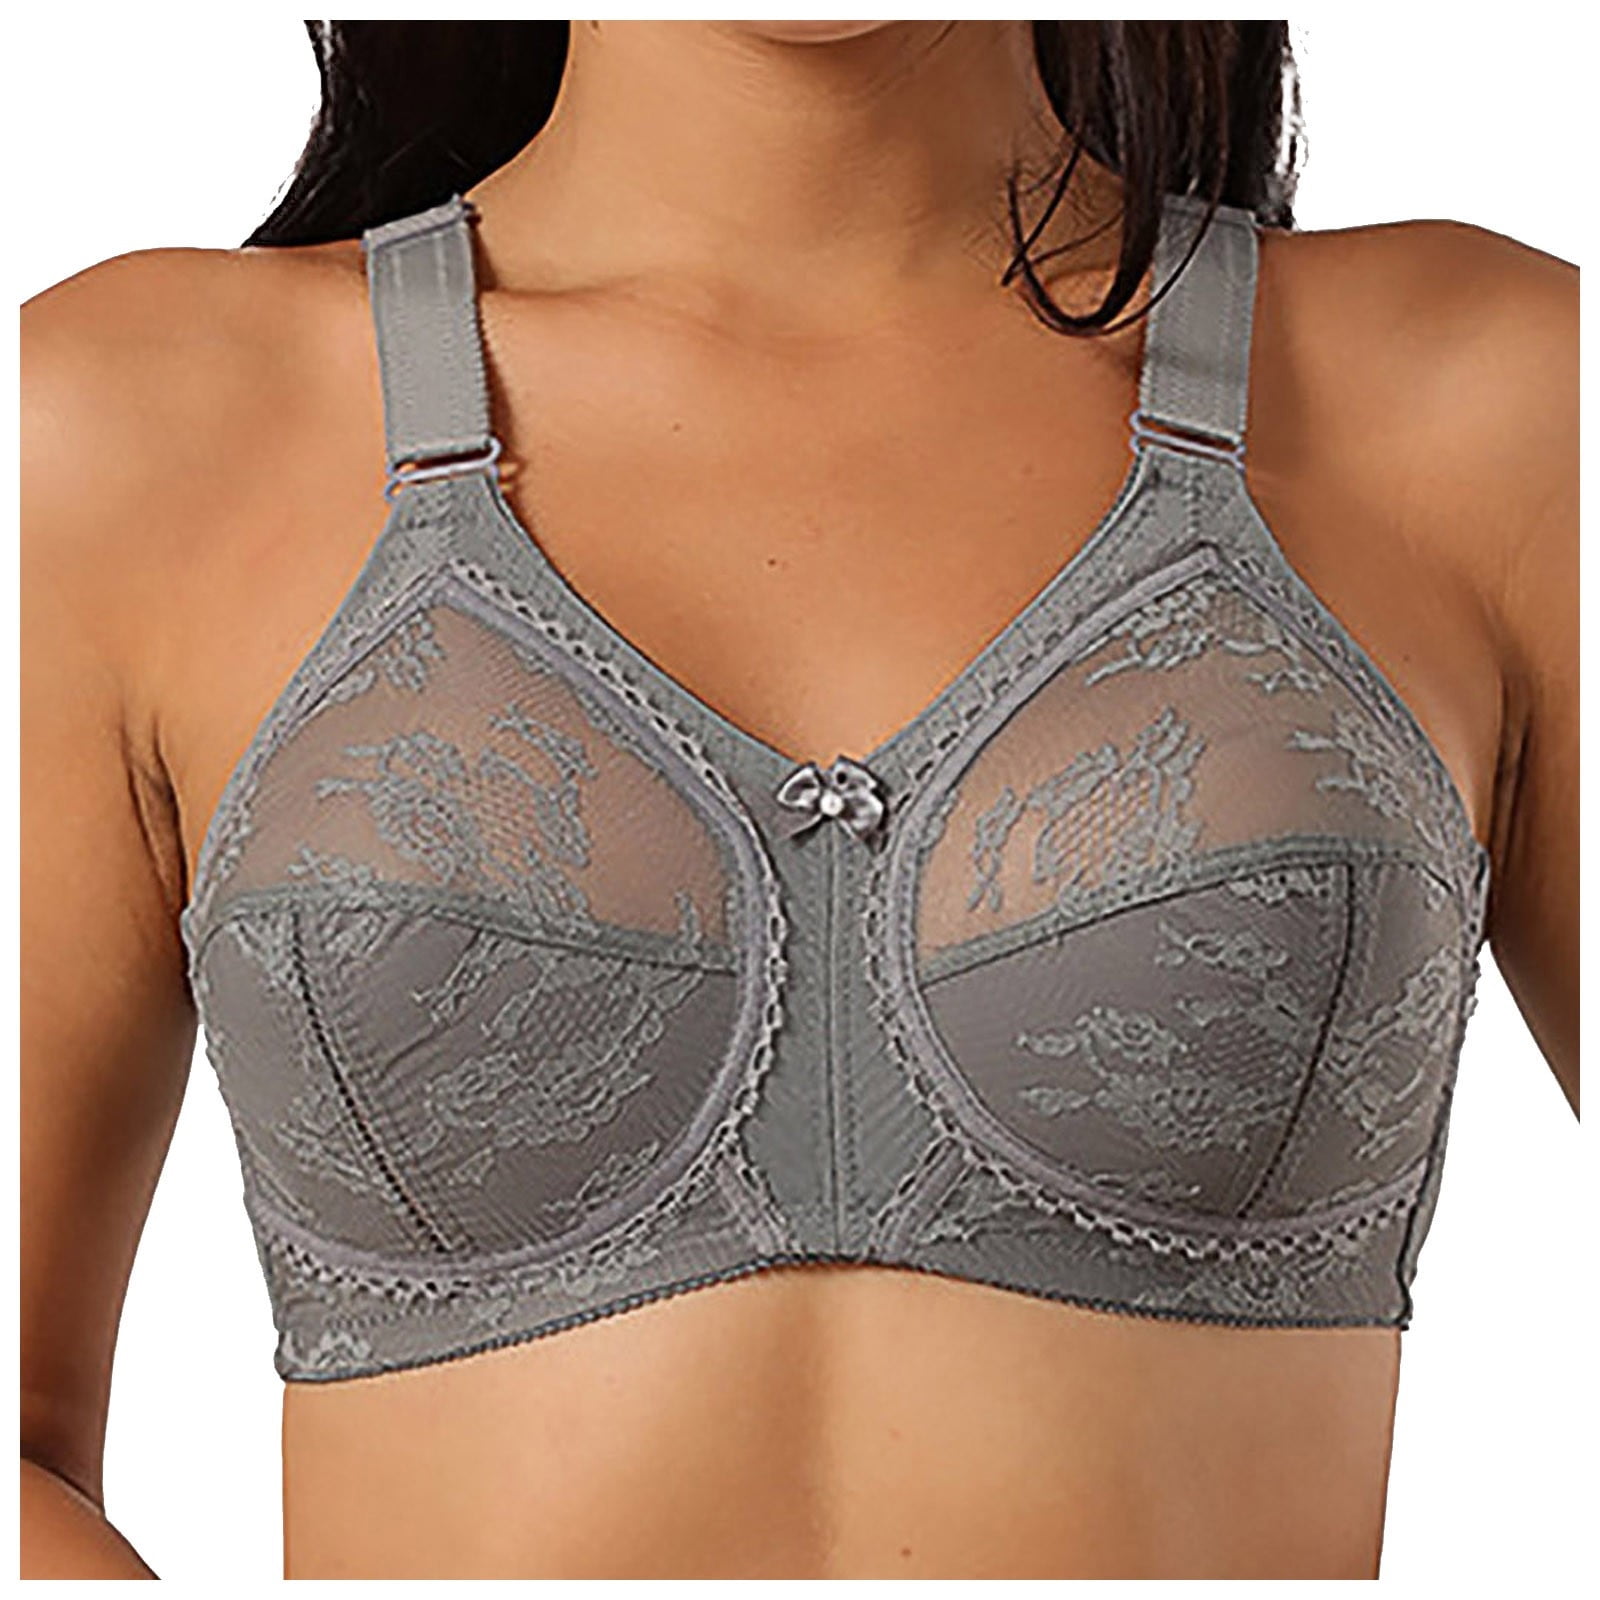 BybiO Nichonade Bra Invisible Deep V Plunge Bra Anti Saggy Breasts Bra  Wirefree Sports Posture Correcting Bra (A,Small) at  Women's Clothing  store